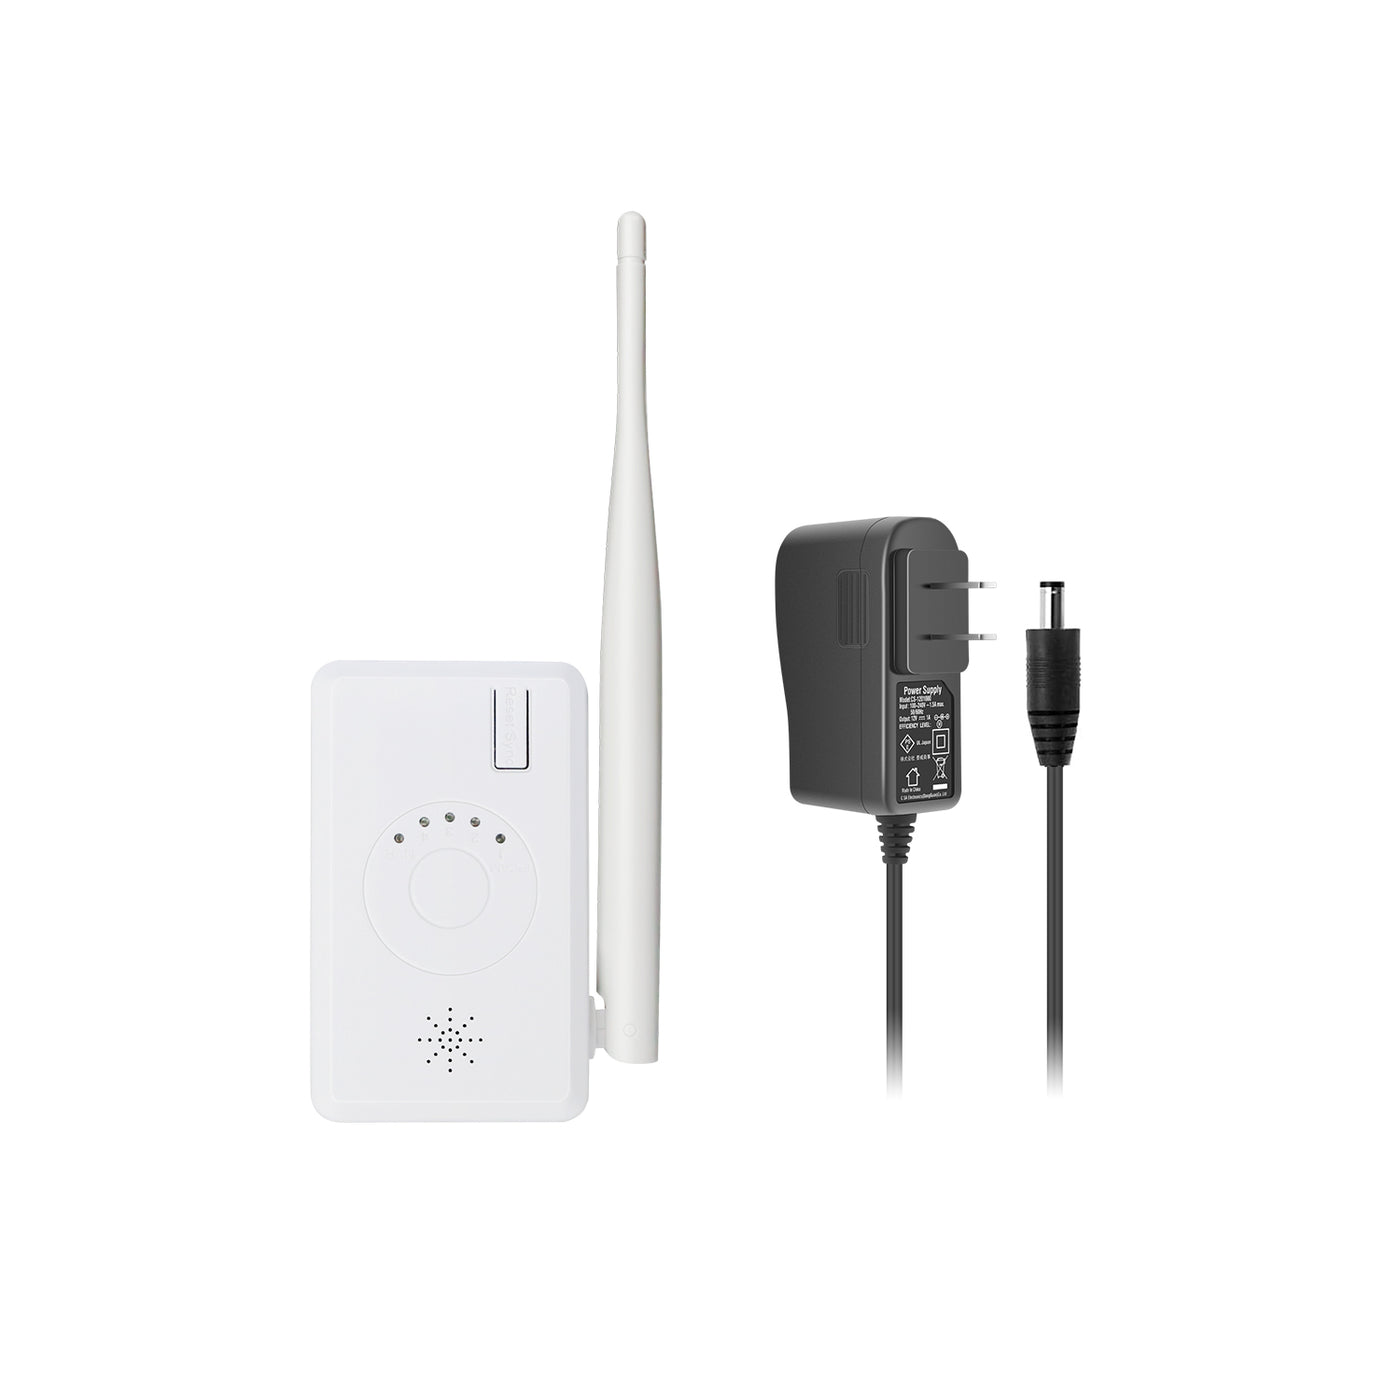 WiFi Repeater, Indoor, 2.4Ghz, DC12V Power Cord